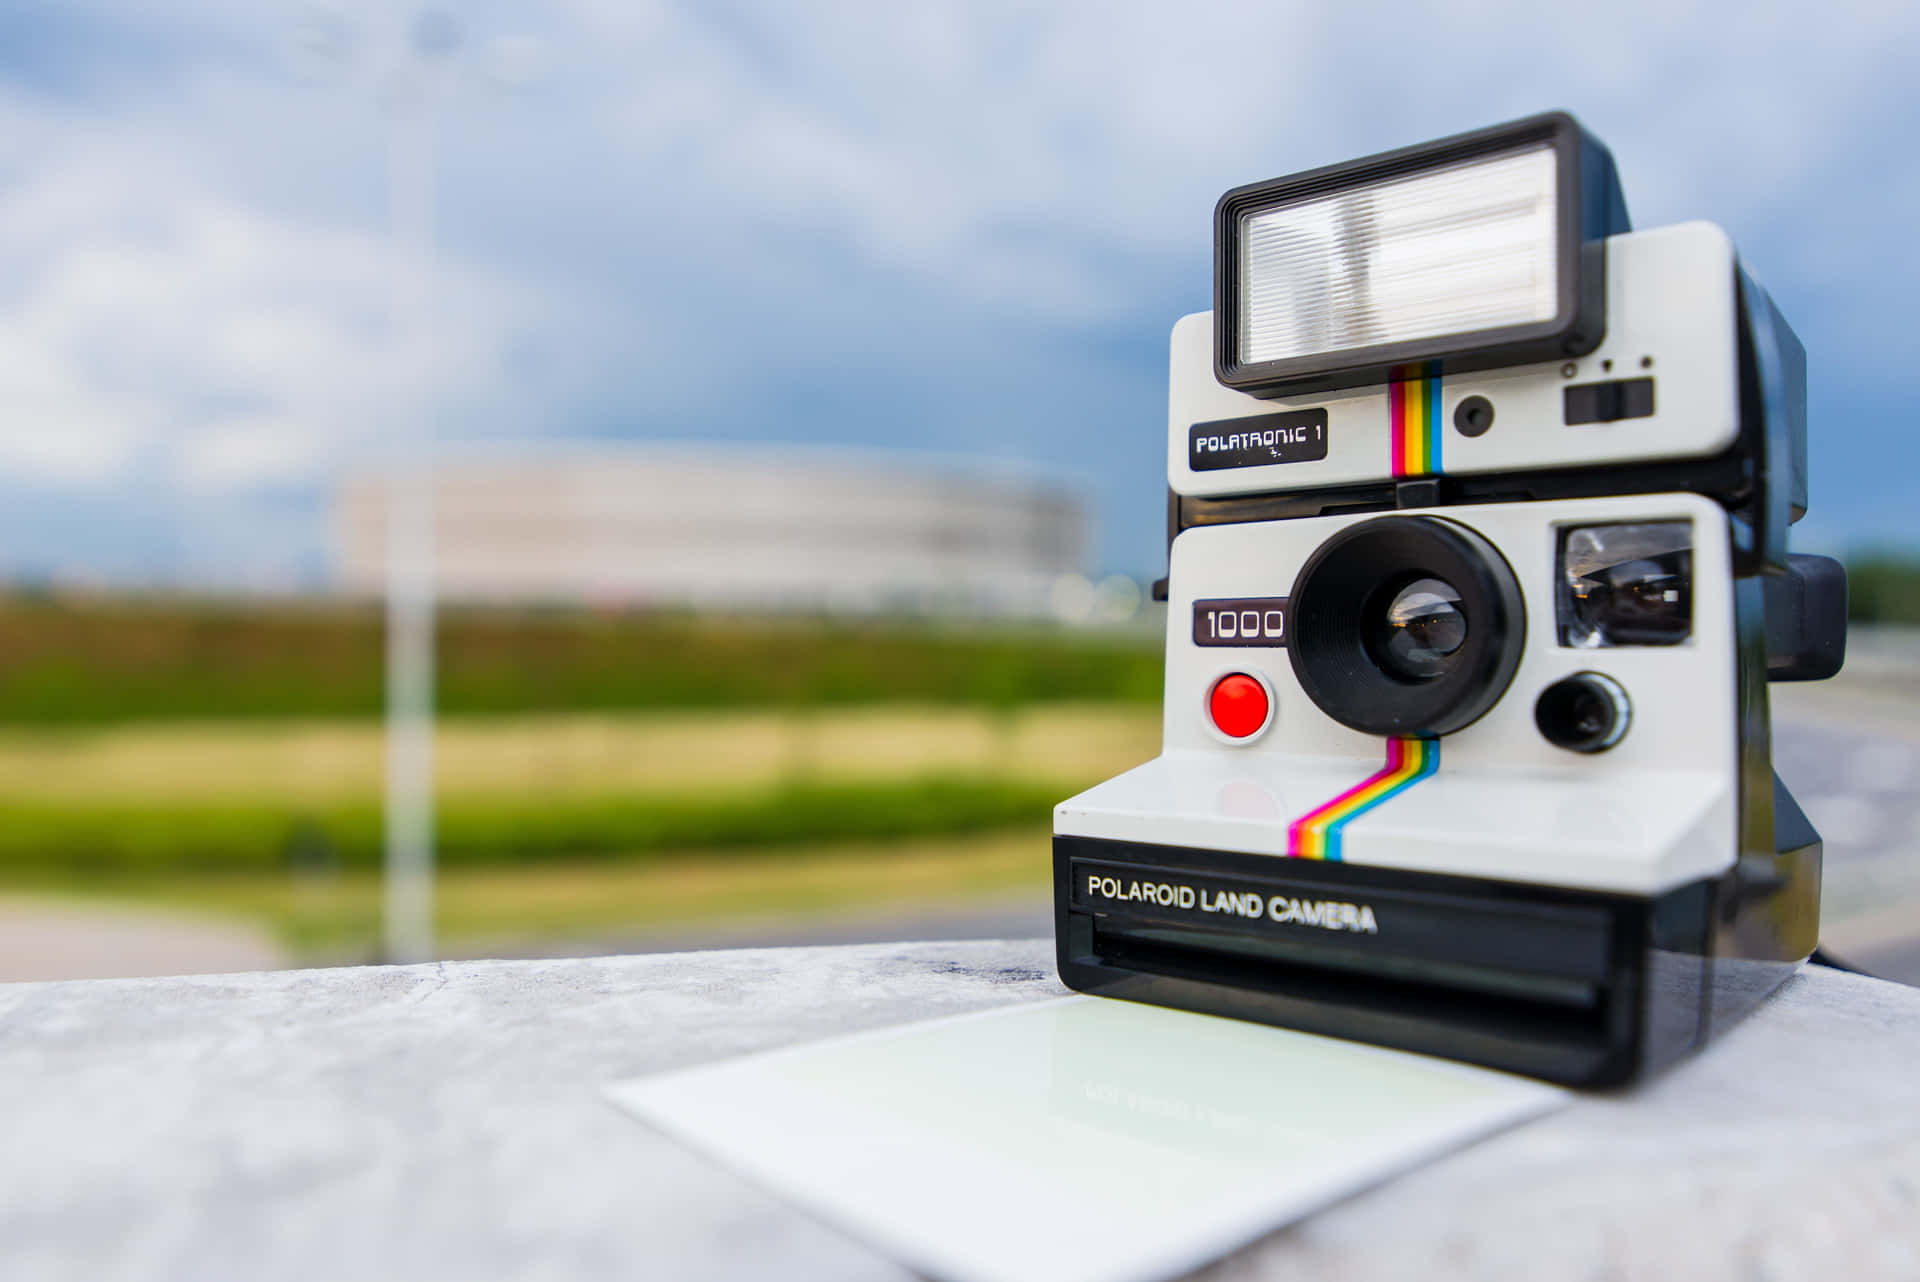 Add a Vintage Touch with a Polaroid Background